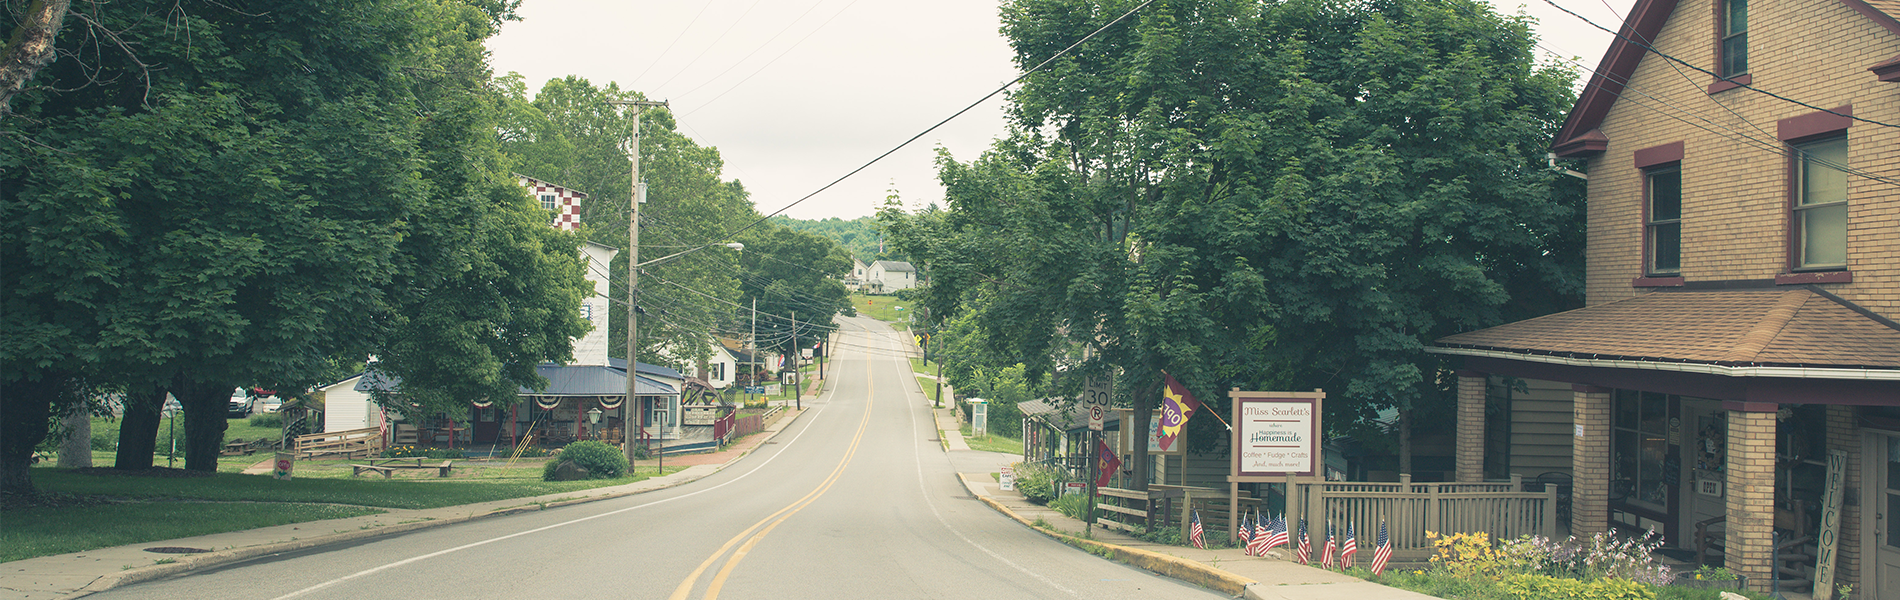 street view of Volant, PA